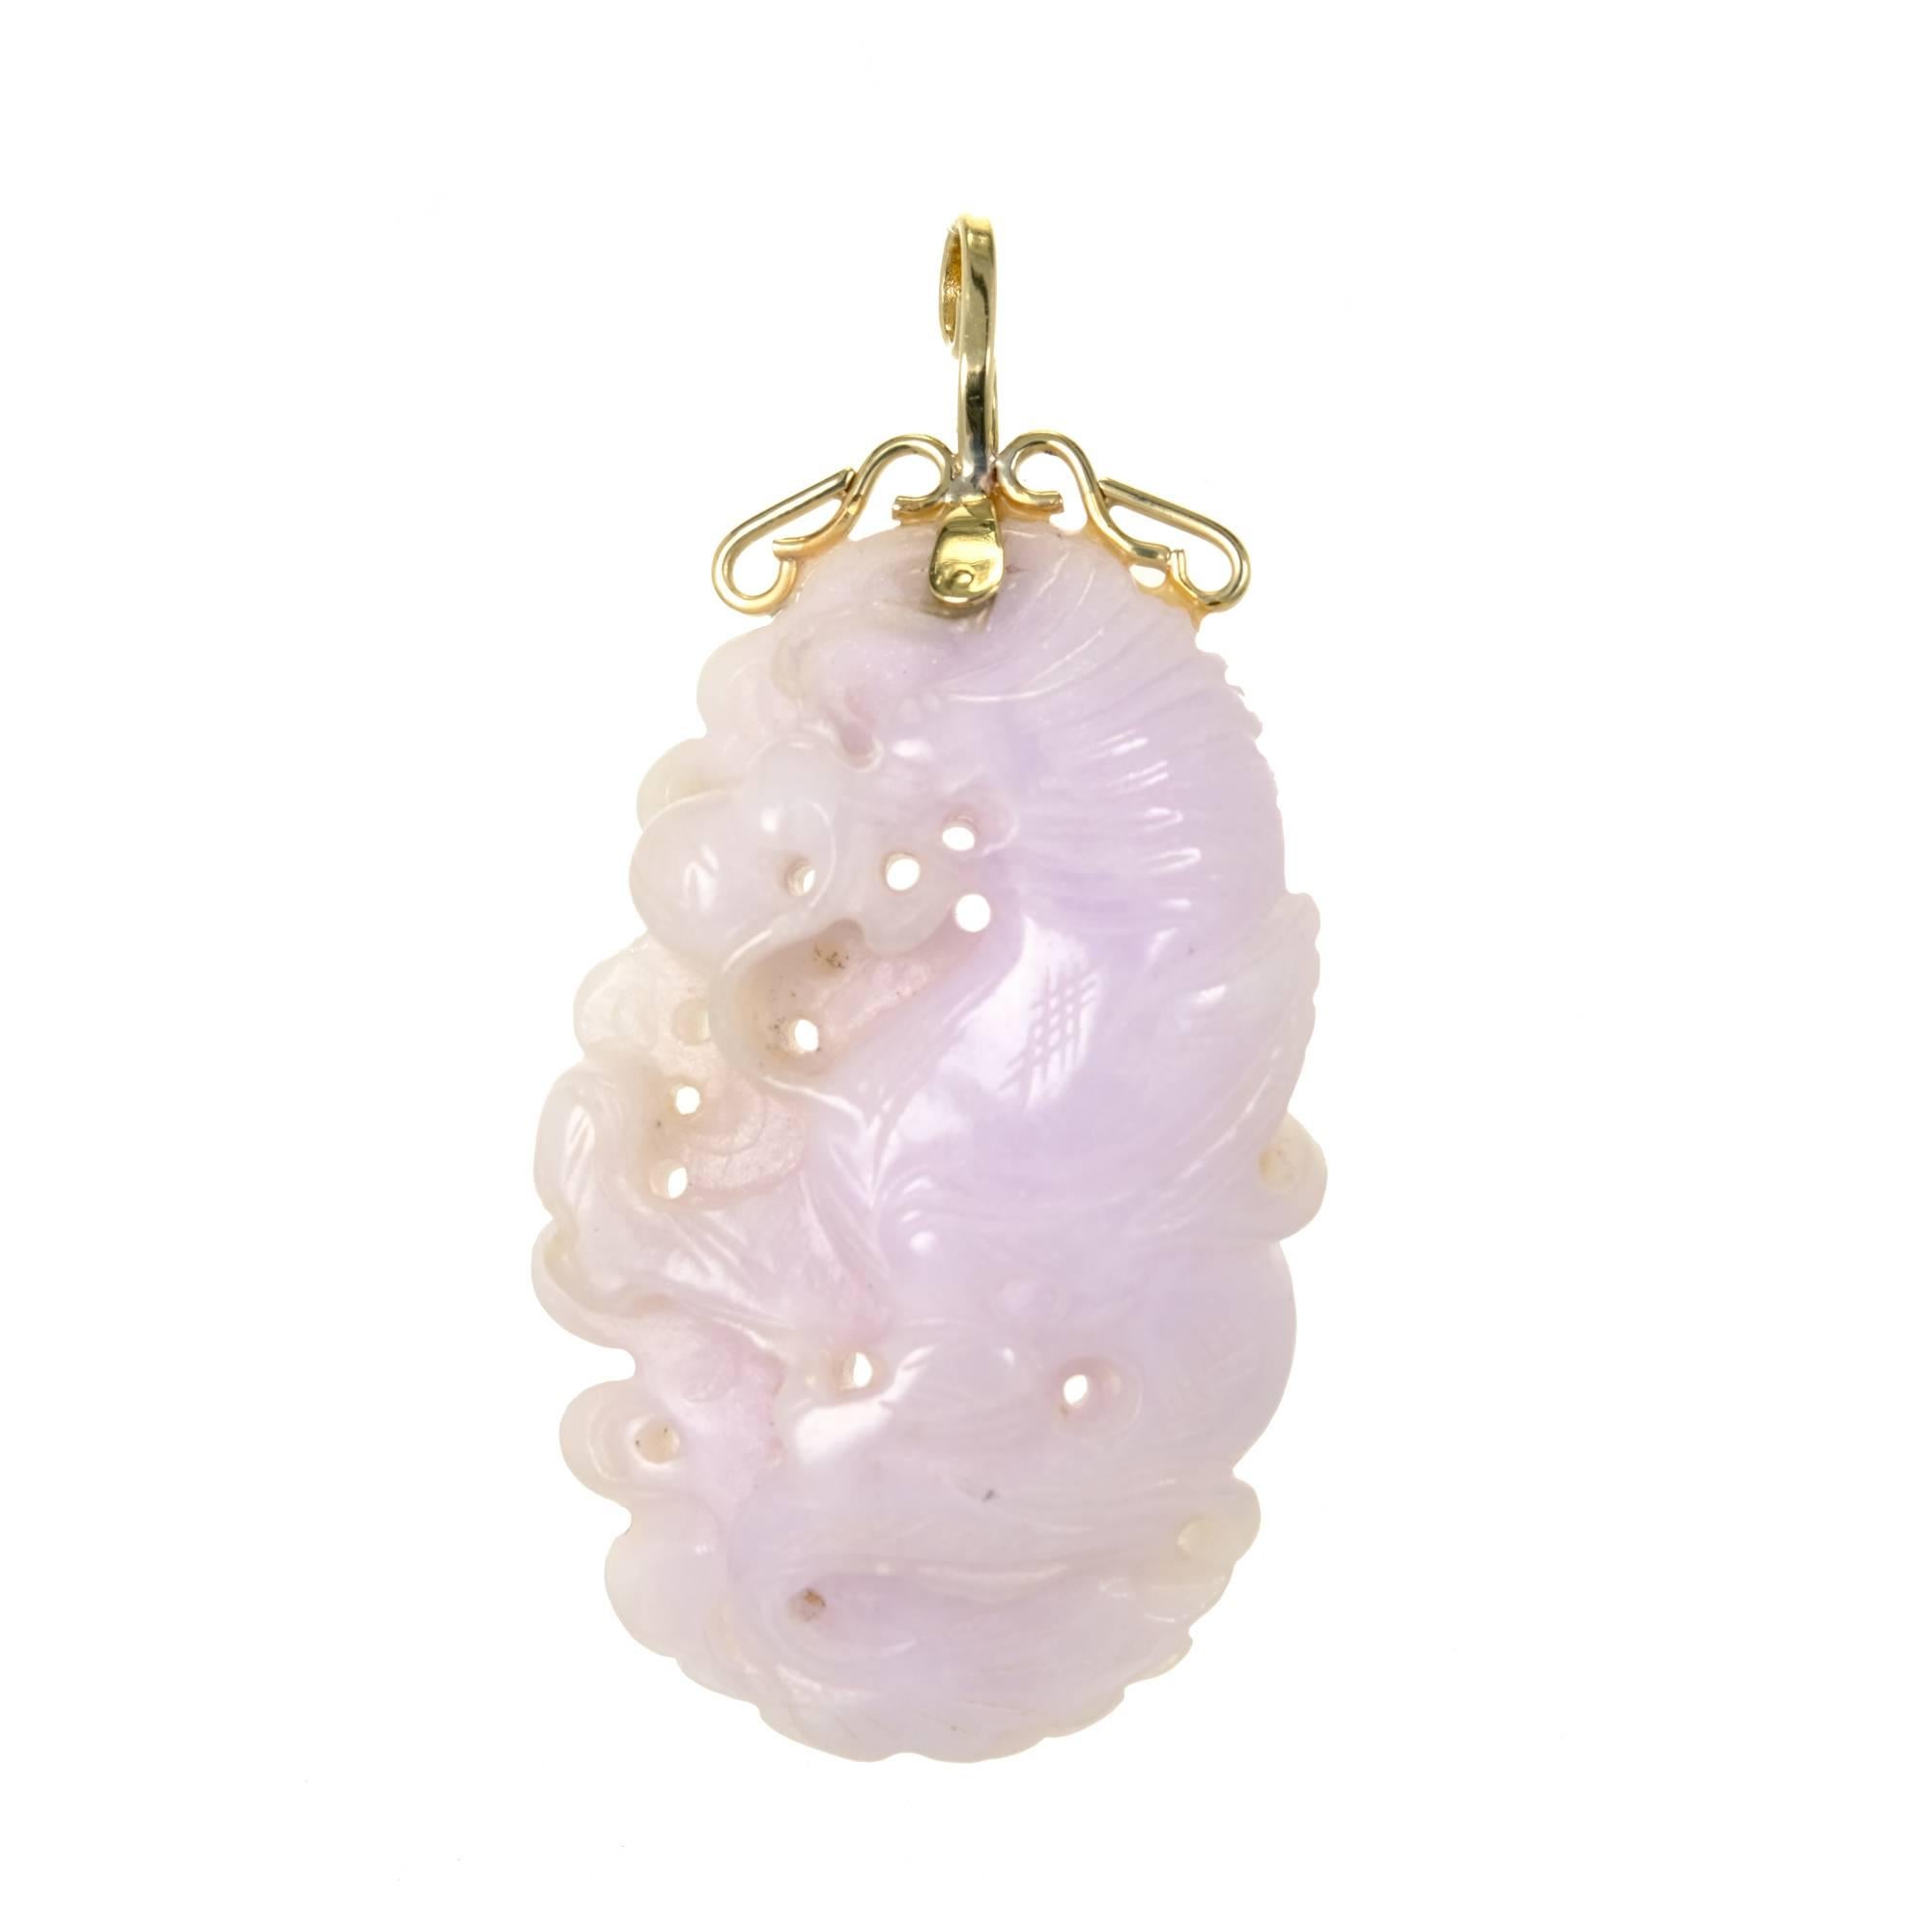 Large beautifully carved and pierced GIA certified natural Jadeite Jade pendant with a handmade 14k gold top.

1 pierced carved light purple Jadeite Jade, 50.33 x 31.31 x 3.32mm, GIA certificate #2185637096
14k yellow gold
34.51 grams
Tested and